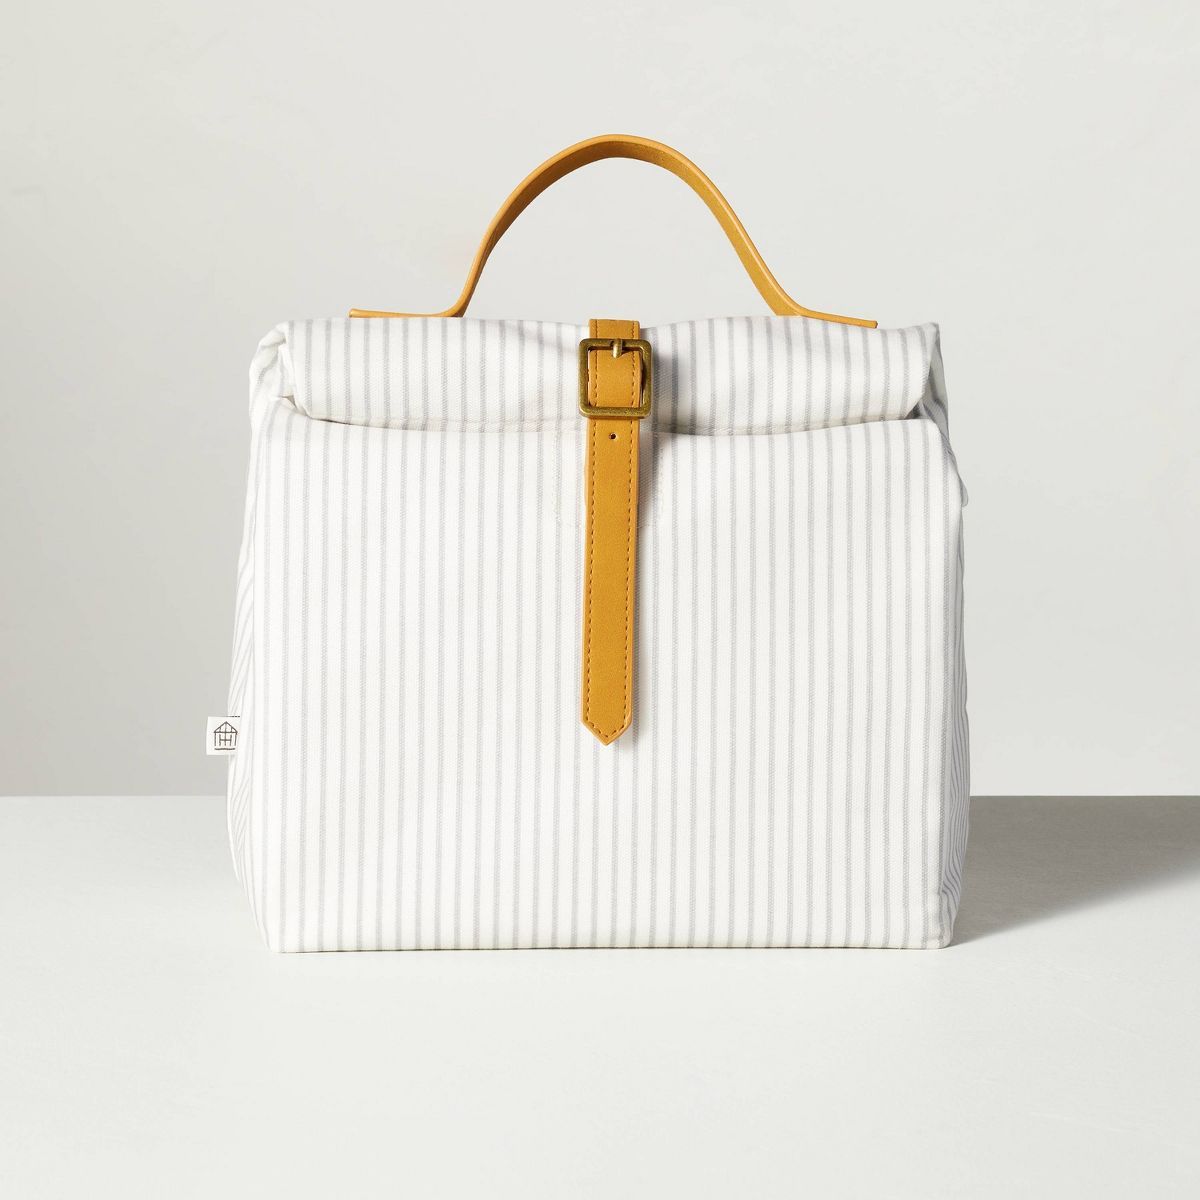 Ticking Stripe Waxed Canvas Lunch Bag Gray/Cream - Hearth & Hand™ with Magnolia | Target